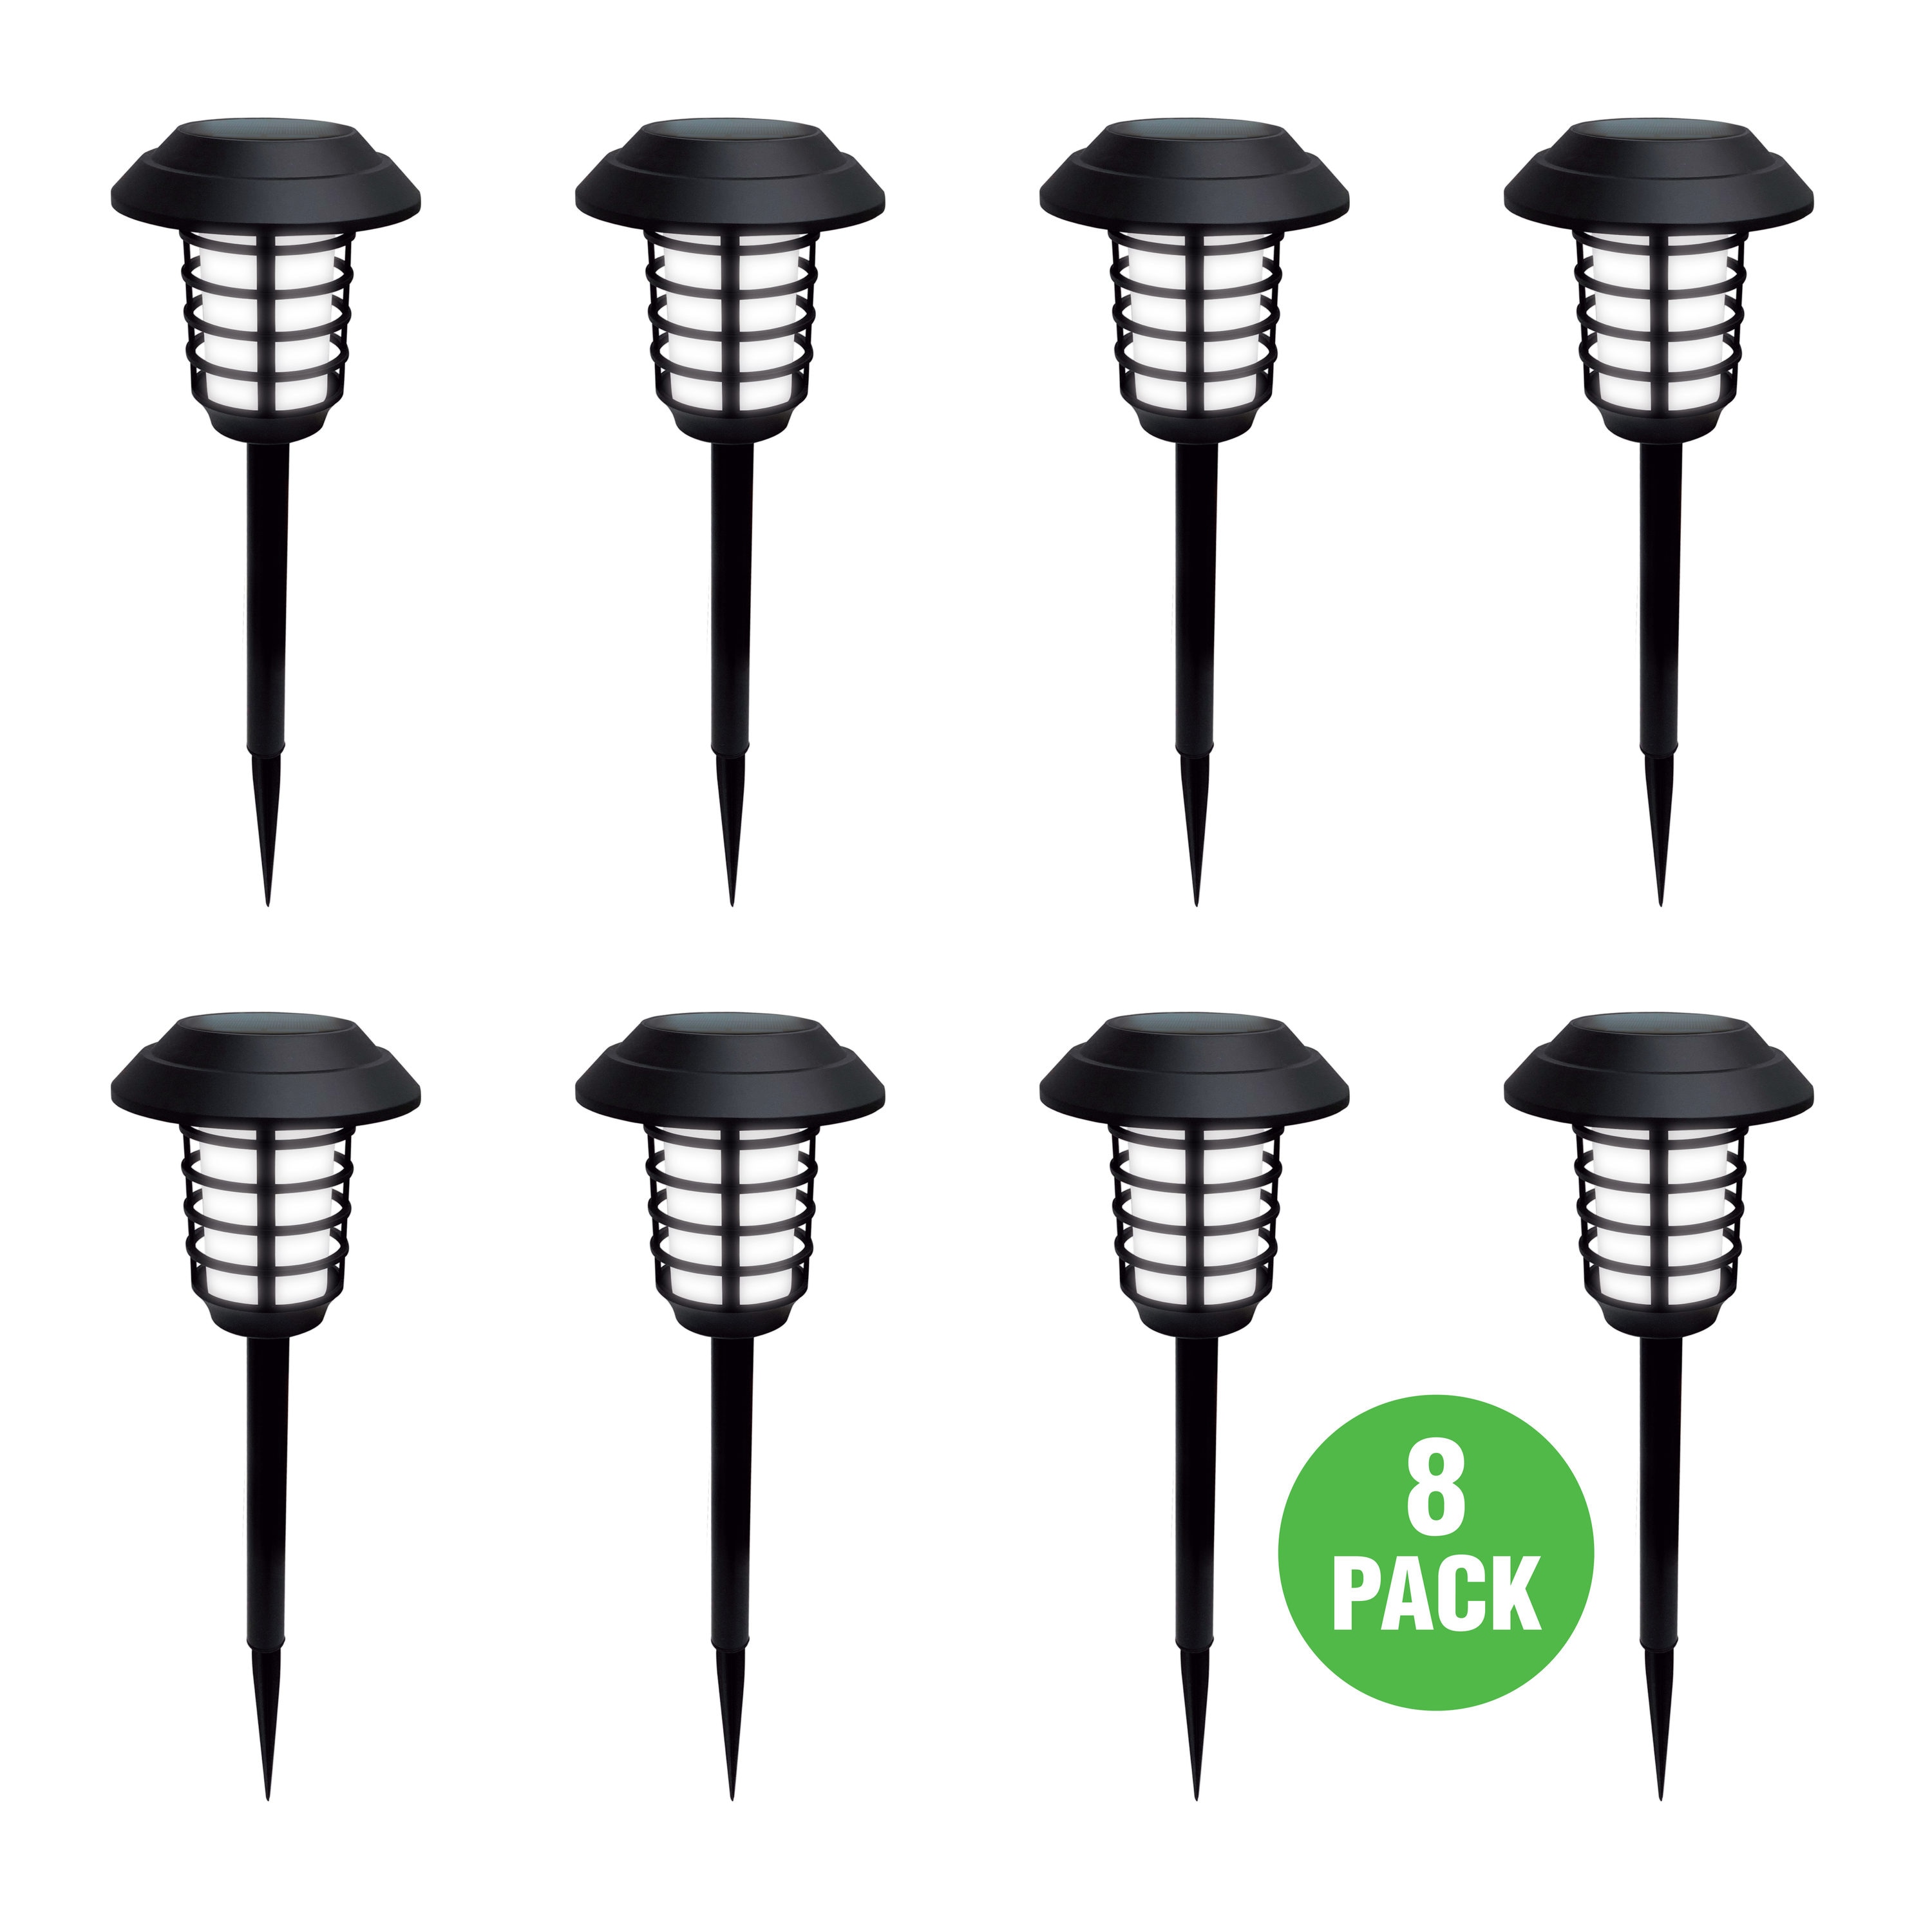 In-Ground Well Lights | LED Outdoor Pathway Lights 1-Pack Without Bulb